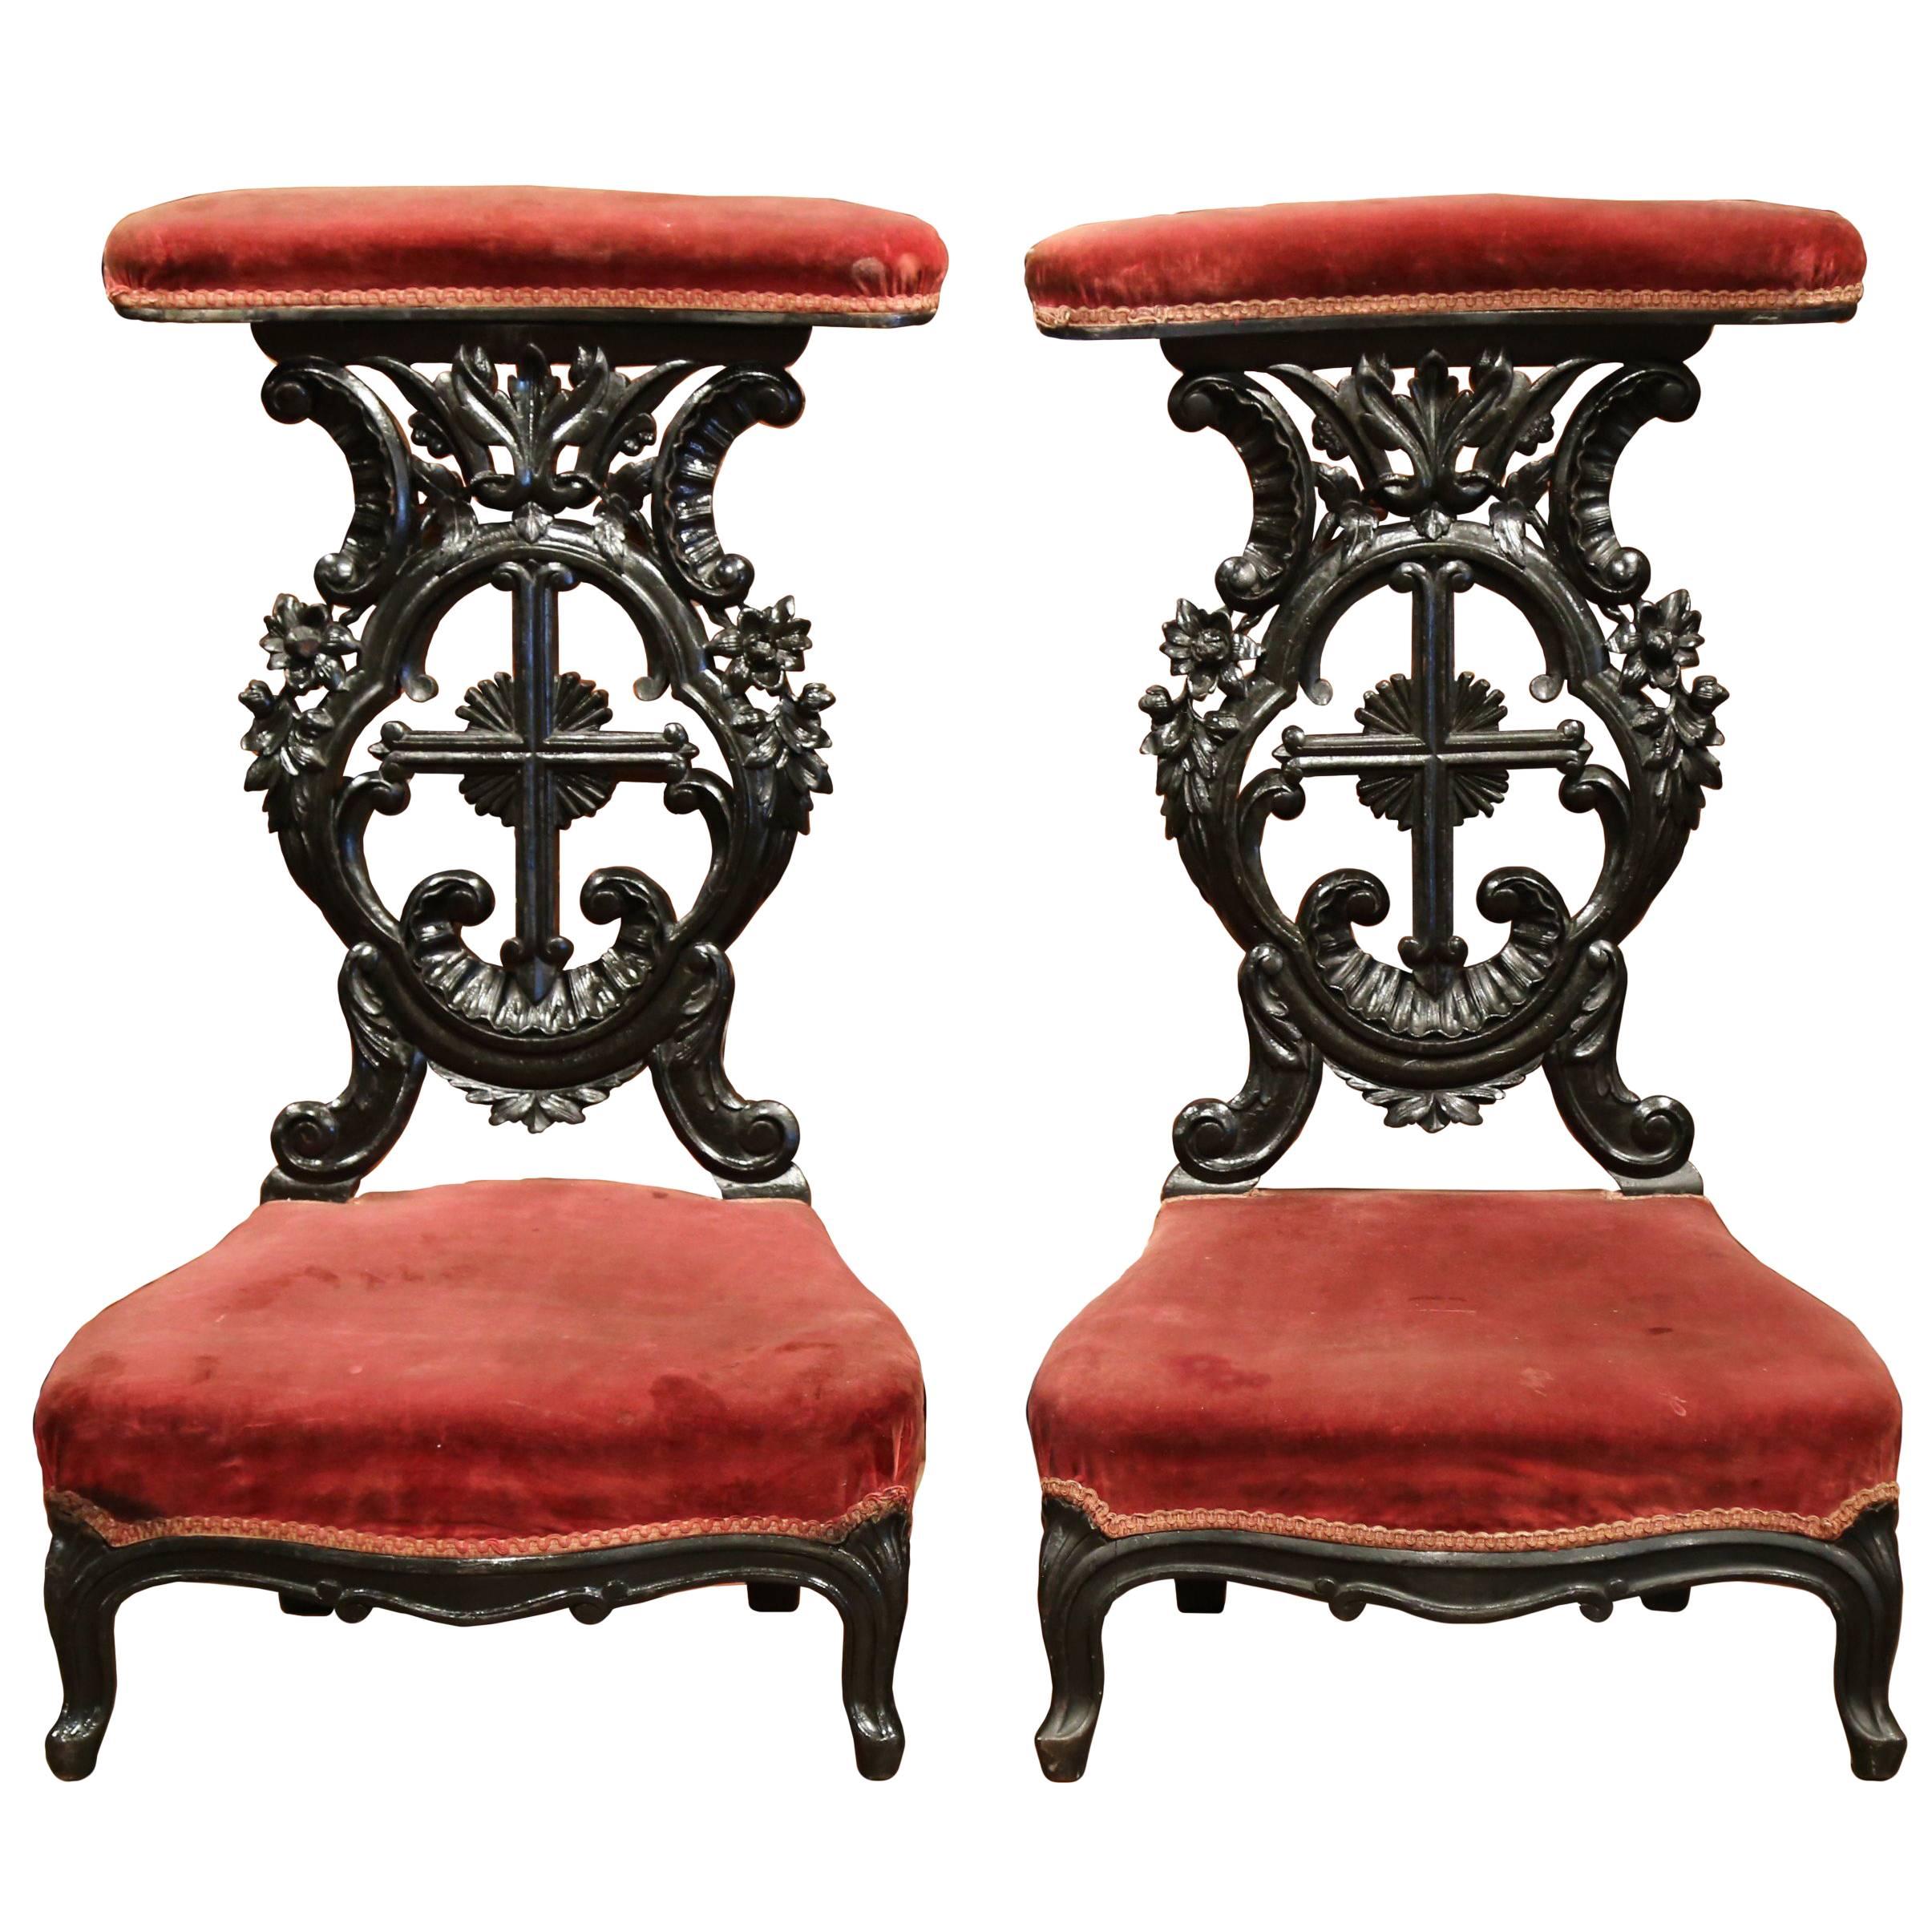 Pair of French Louis XV Hand Carved Walnut Prayer Chairs with Blackened Finish